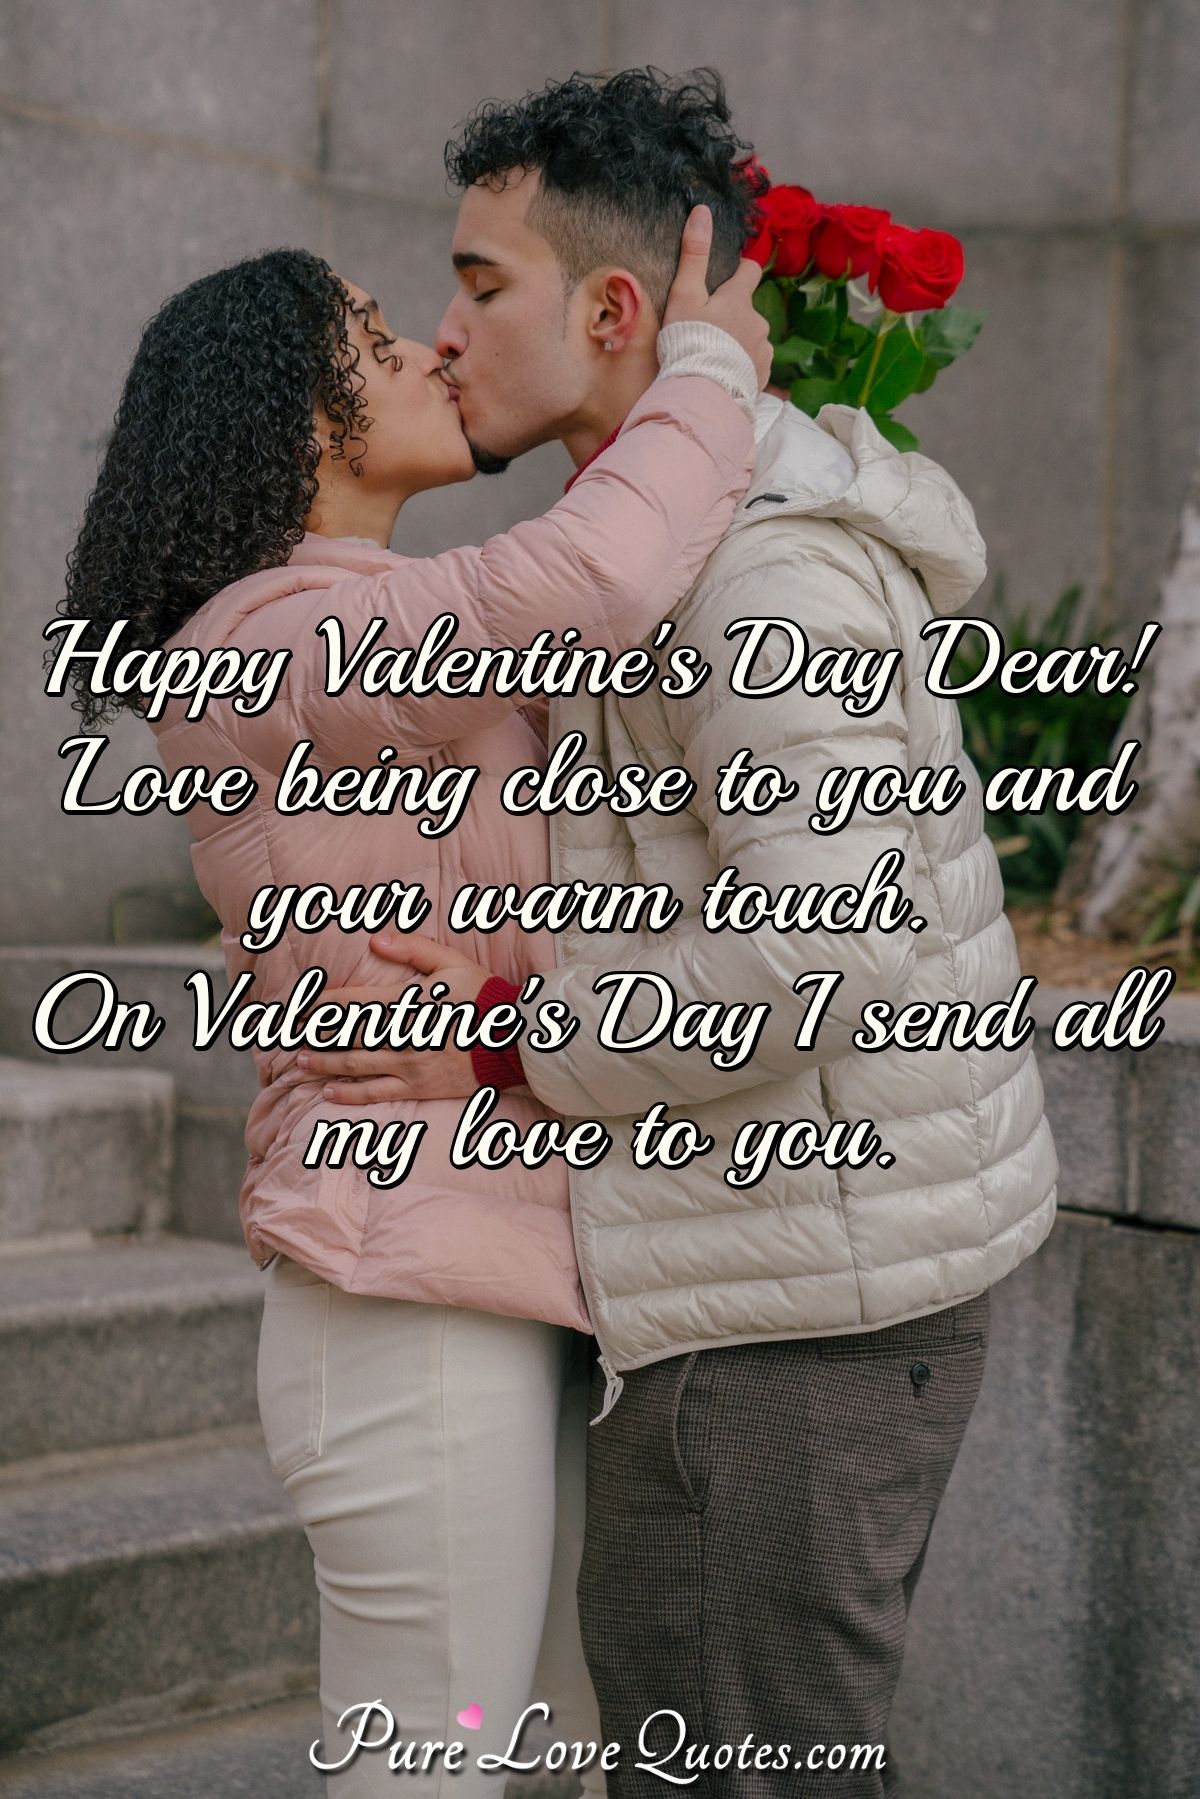 https://www.purelovequotes.com/images/quotes/1200/happy-valentines-day-dear-love-being-close.jpg